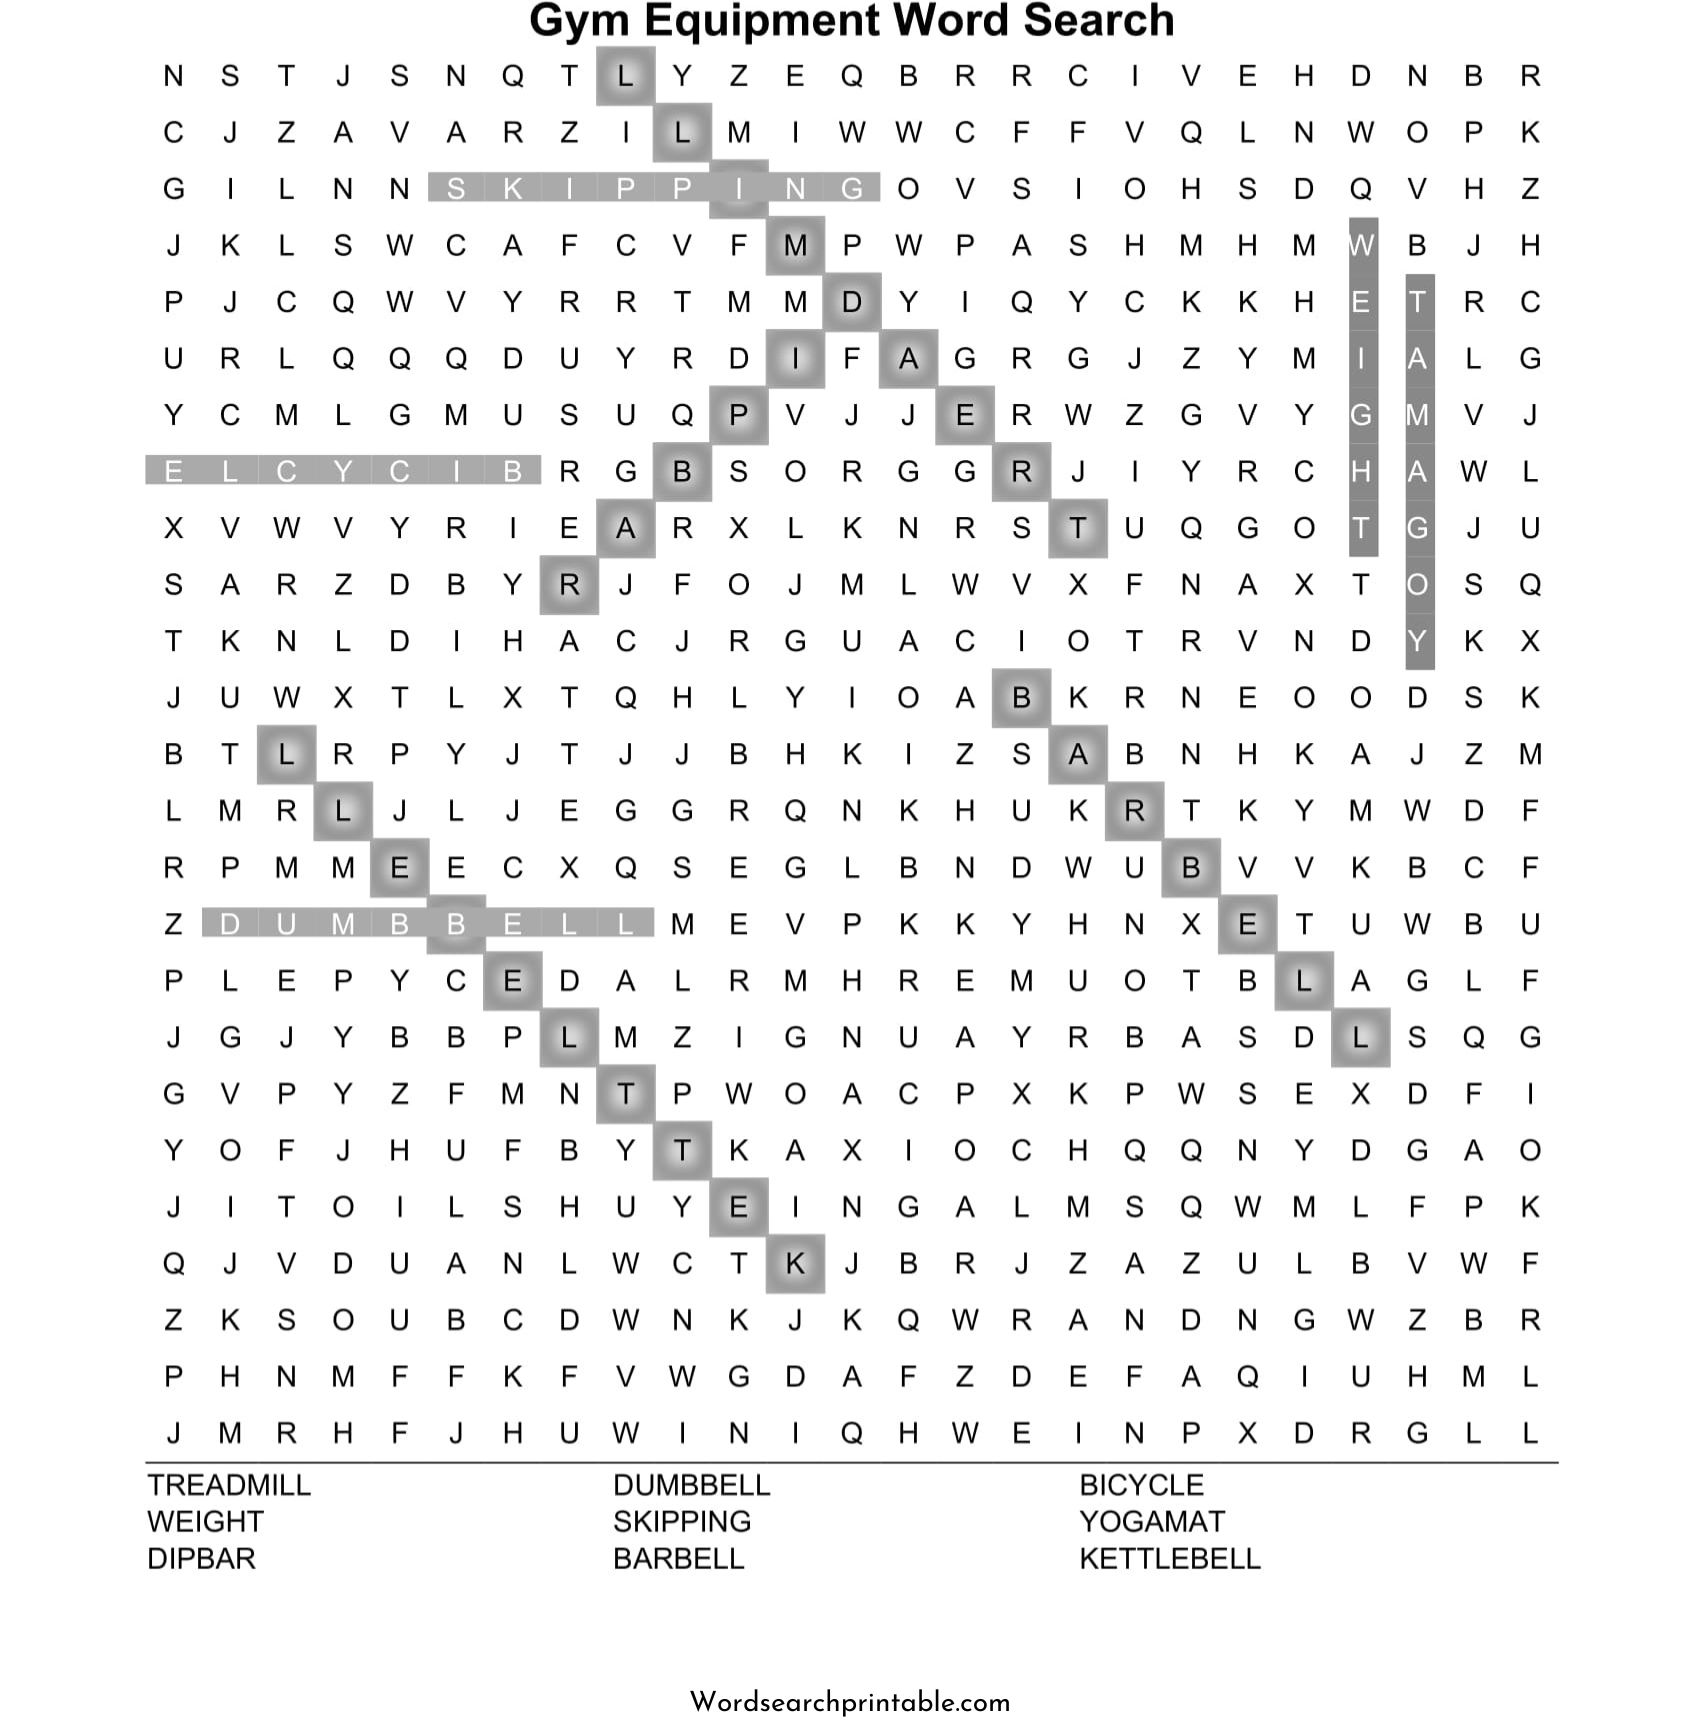 gym equipment word search puzzle solution